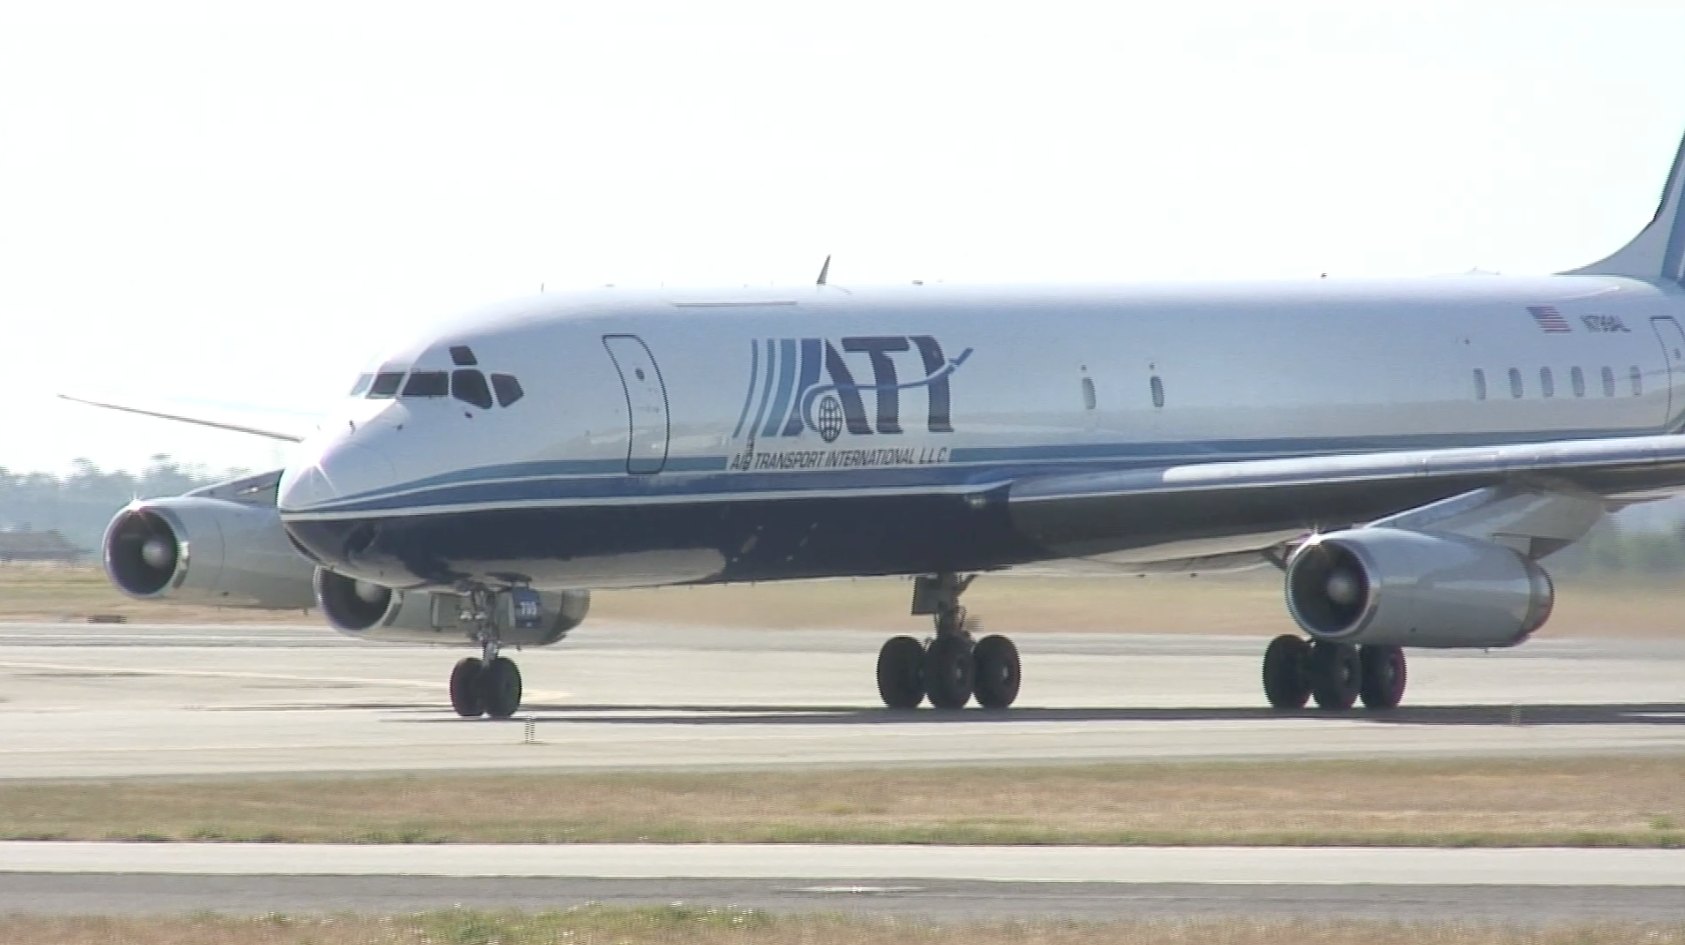 ATI DC-8-62 N799AL is seen taxiing to the parking area having just touched down at Travis AFB inbound from McClellan Airport on May 12, 2013. This was the very last ever passenger DC-8 flight in the Continental United Sates. This is a screenshot from the 9 episode mini series "DC-8 Farewell" that streams on the JetFlix TV streaming service for aviation super fans.